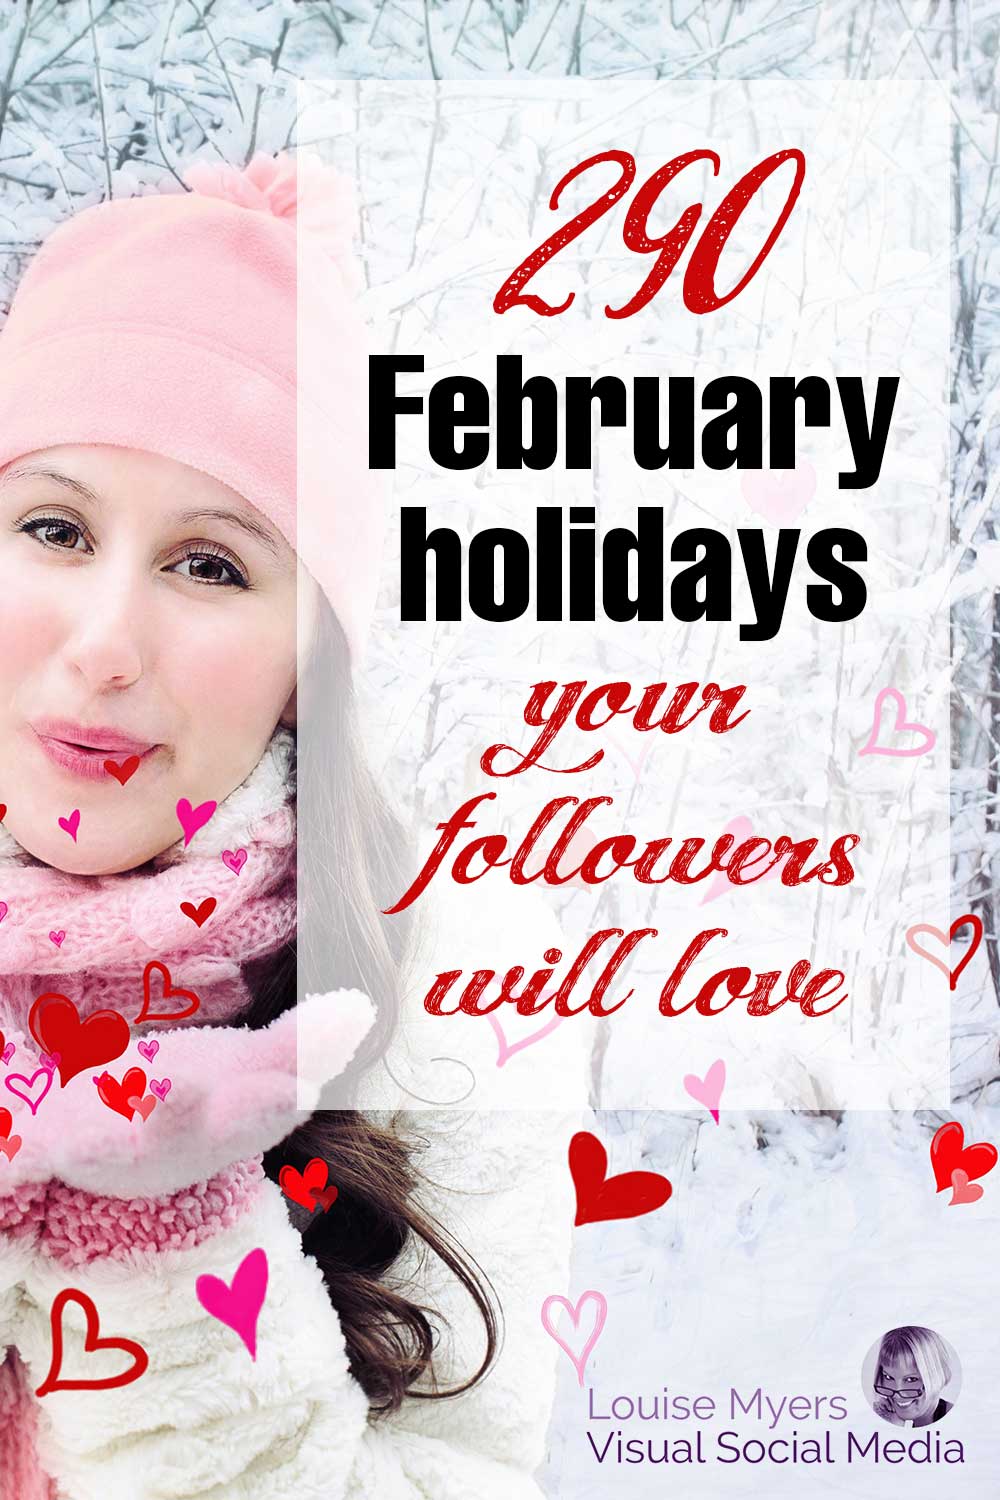 snow scene with woman in pink hat and gloves says 290 february holidays your followers will love.